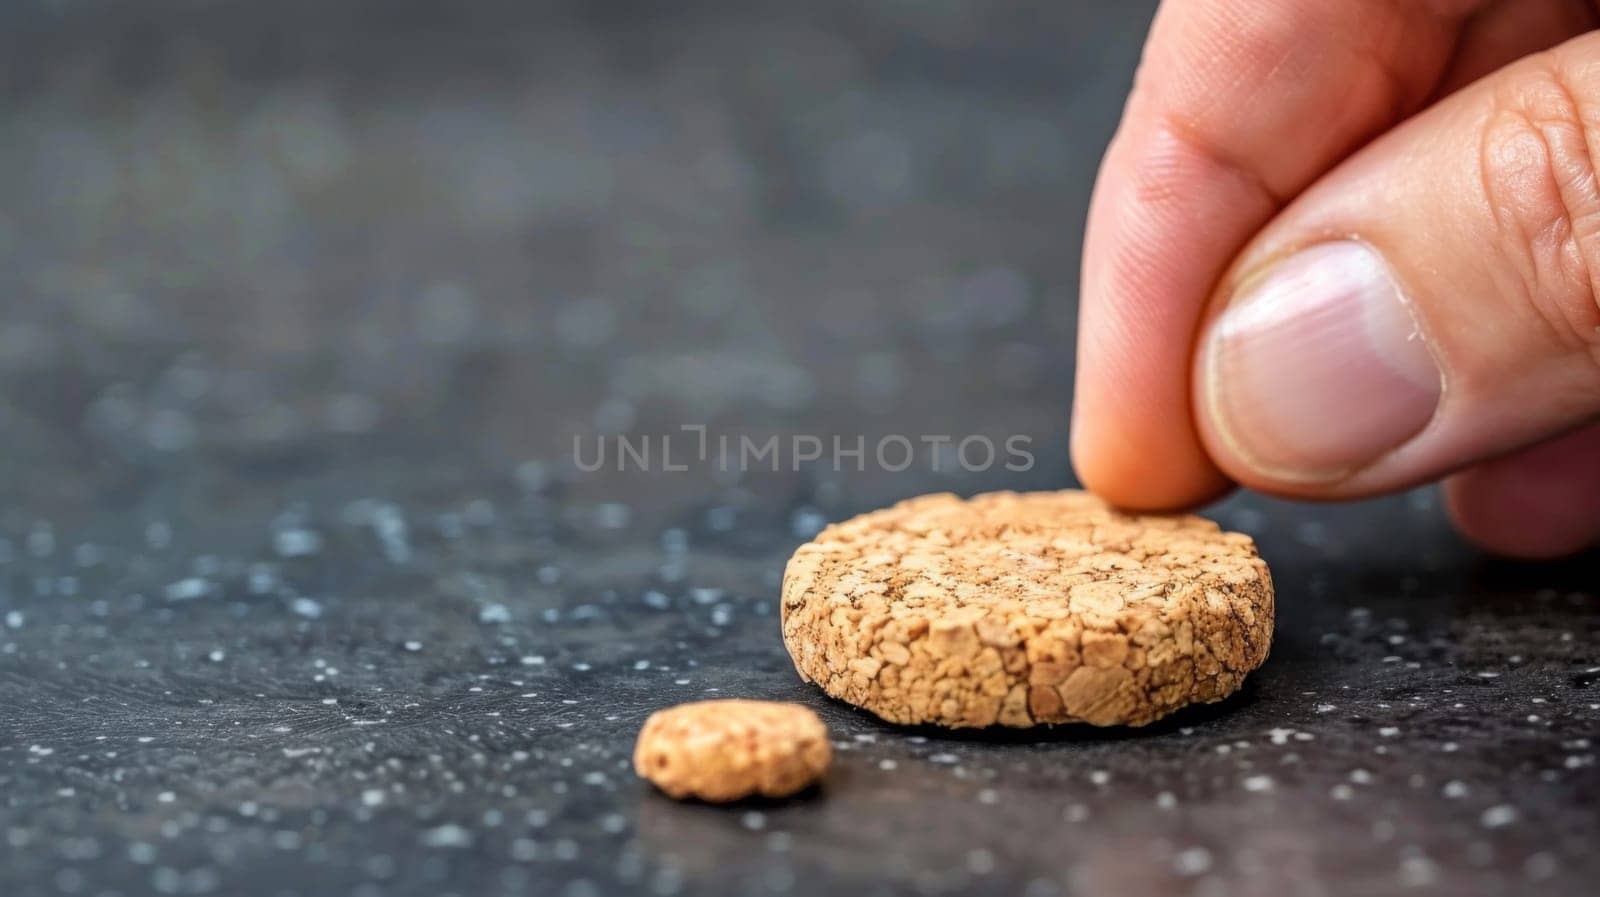 A person is holding a piece of cork on top of another